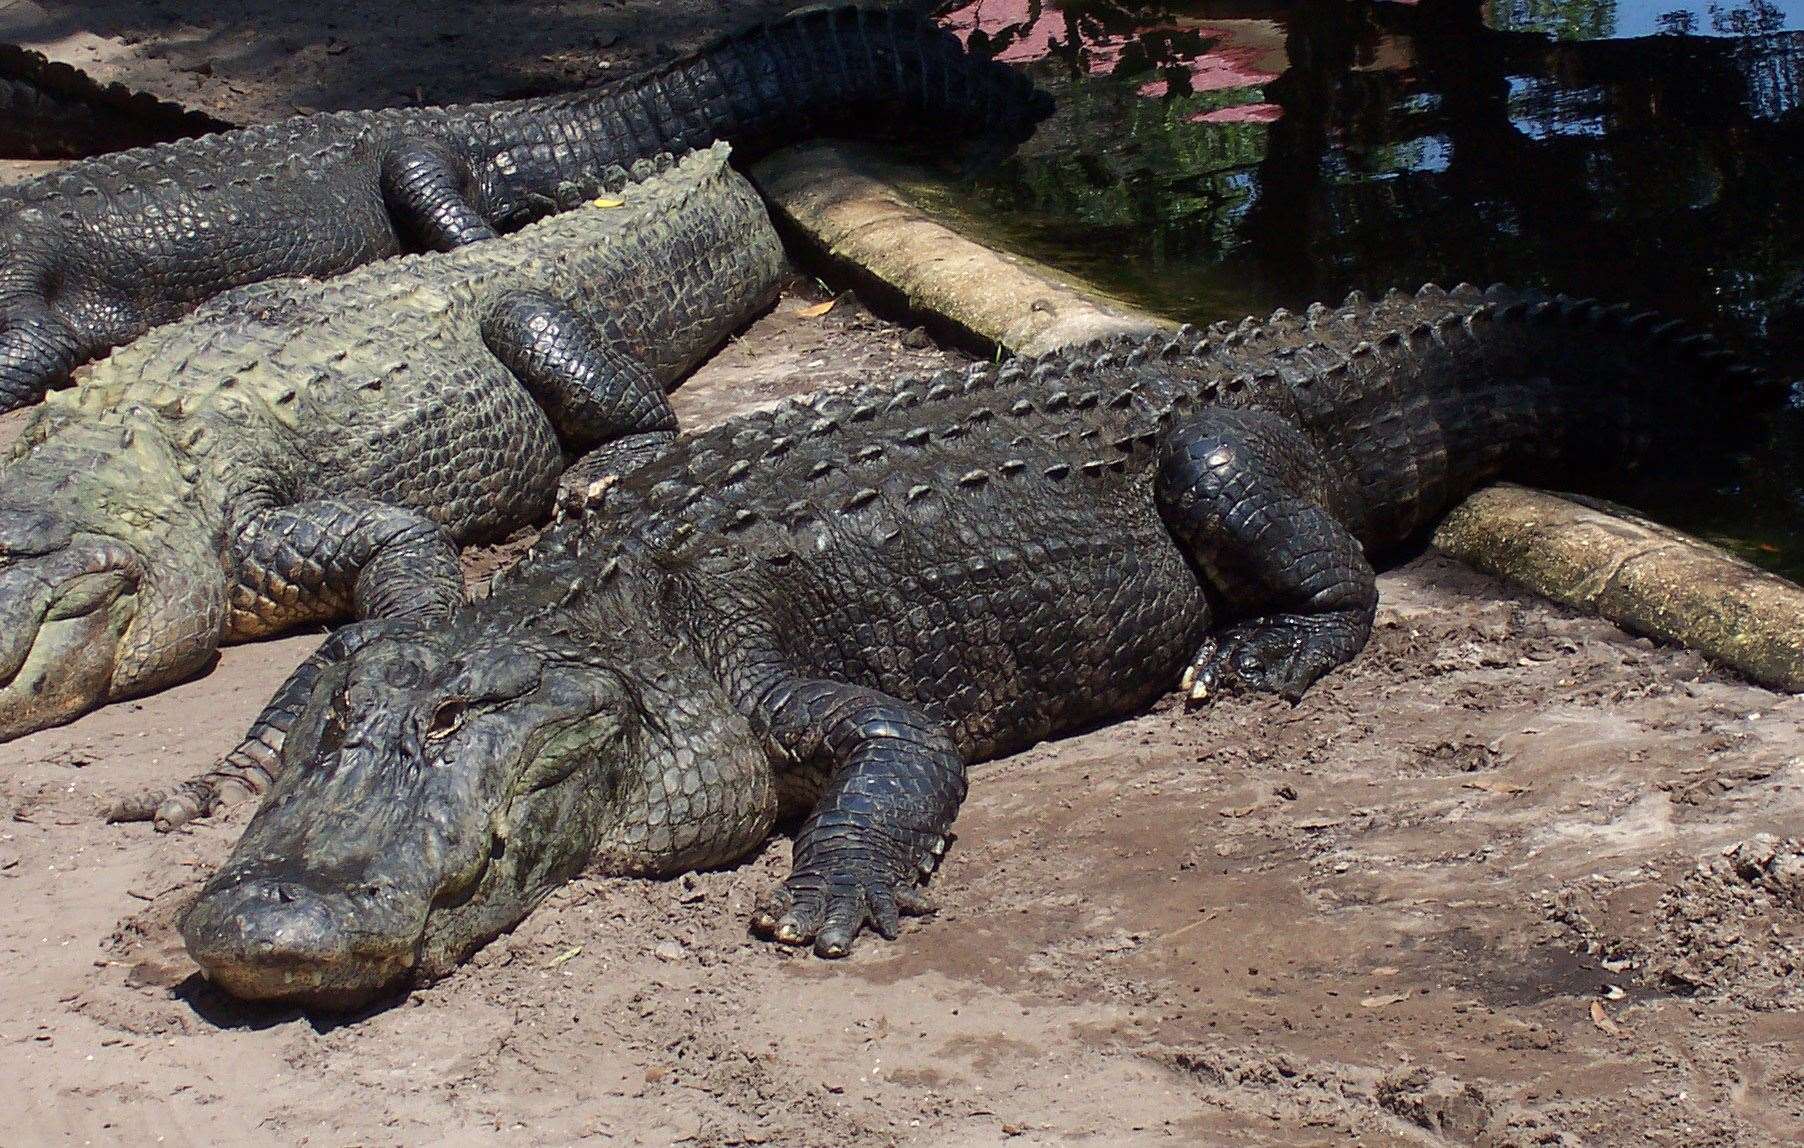 Crocodiles also have particularly low ageing rates, say researchers (Royal Veterinary College/PA)